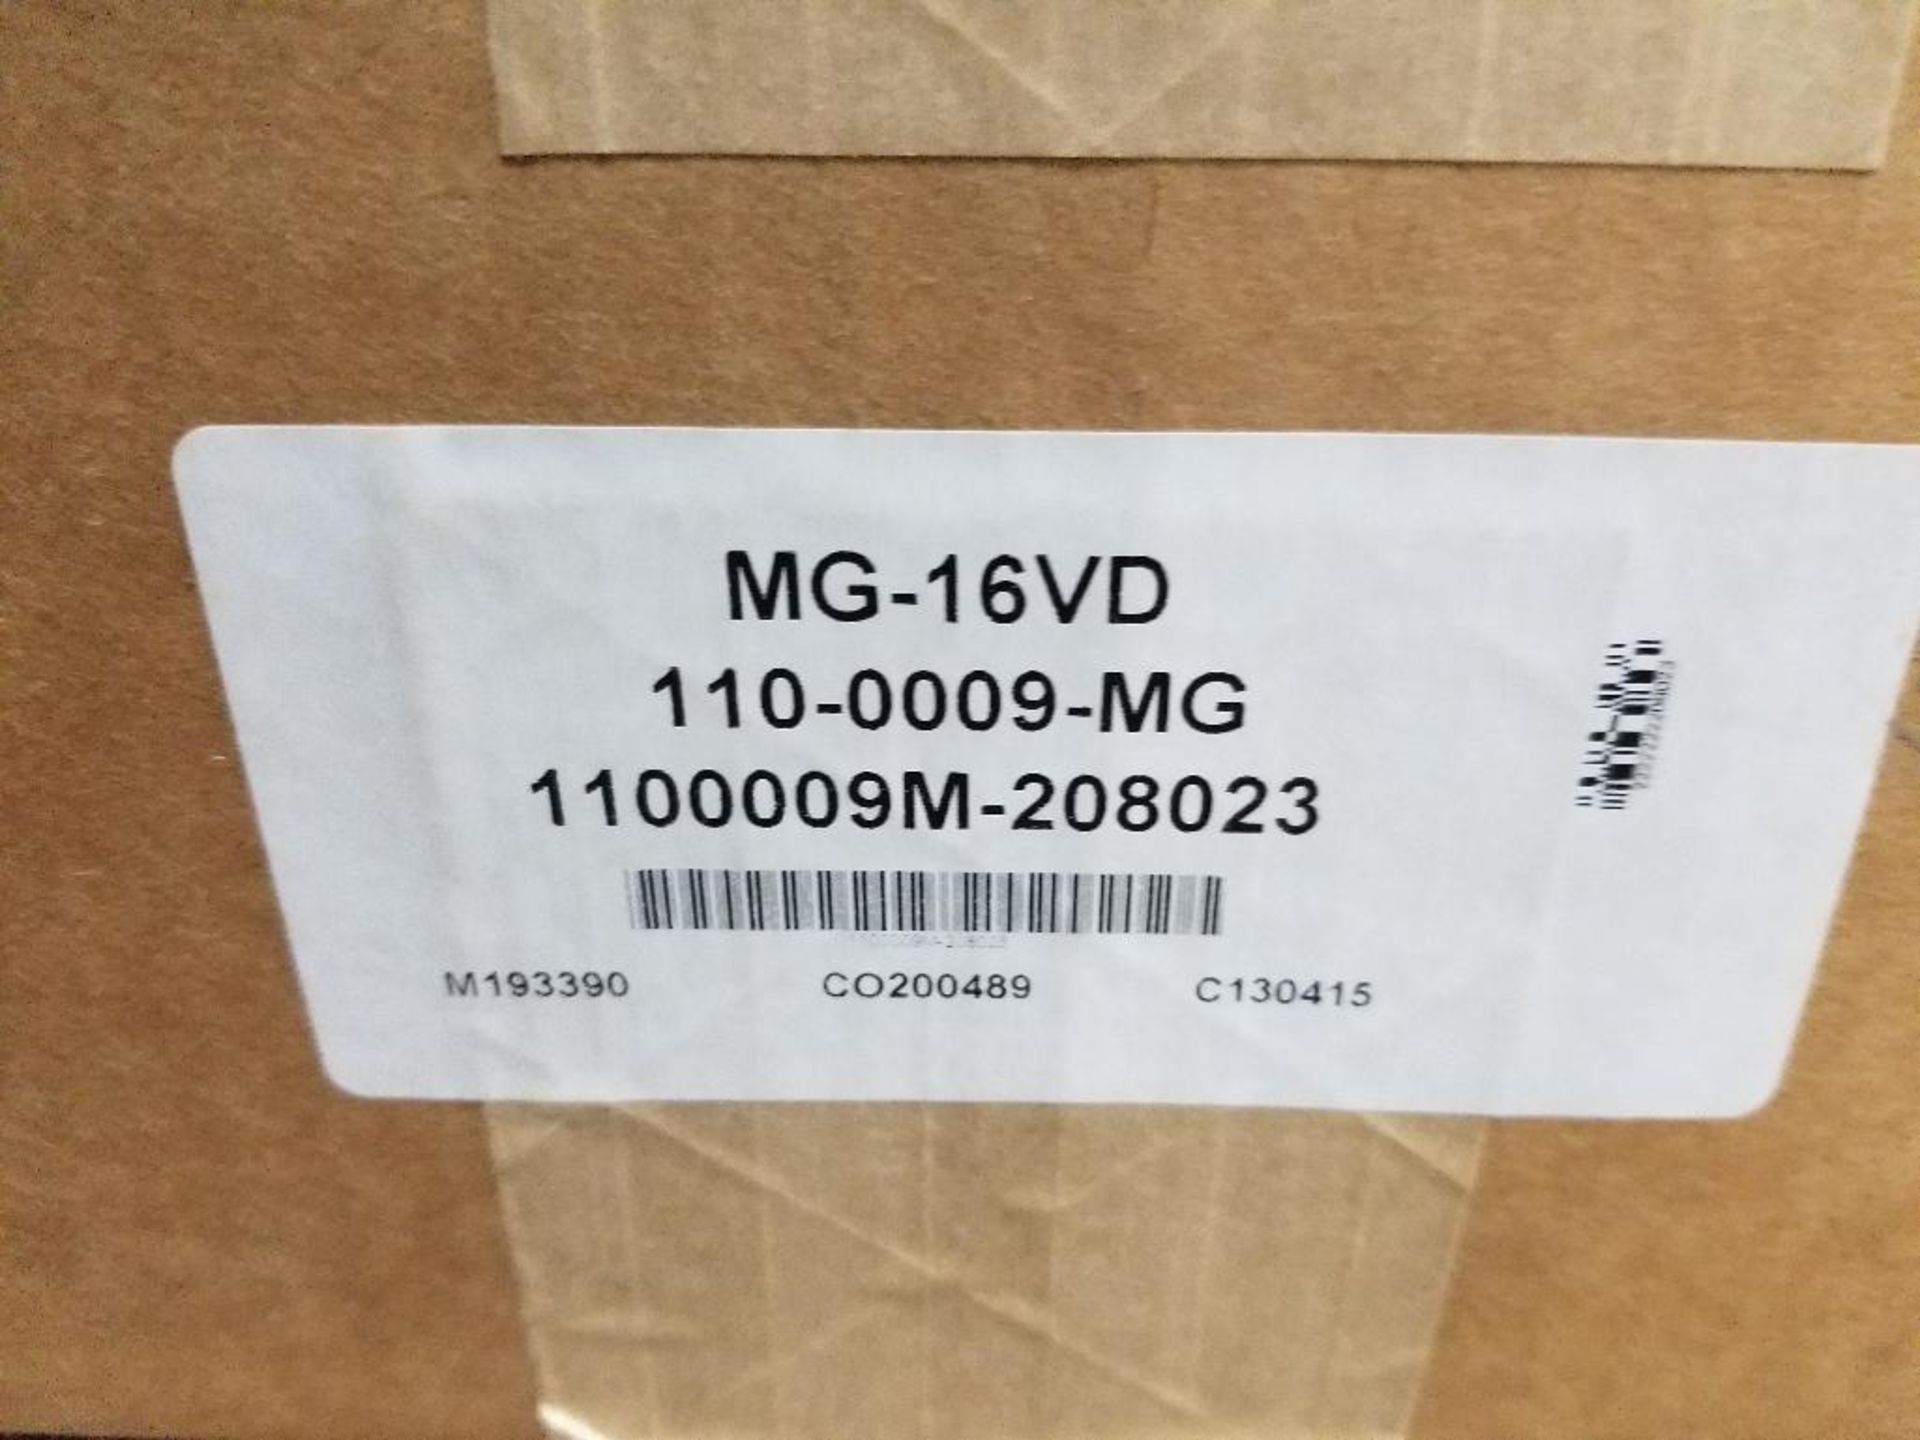 Eaton surge protection device. Model MG-16VD. New in box. - Image 3 of 4